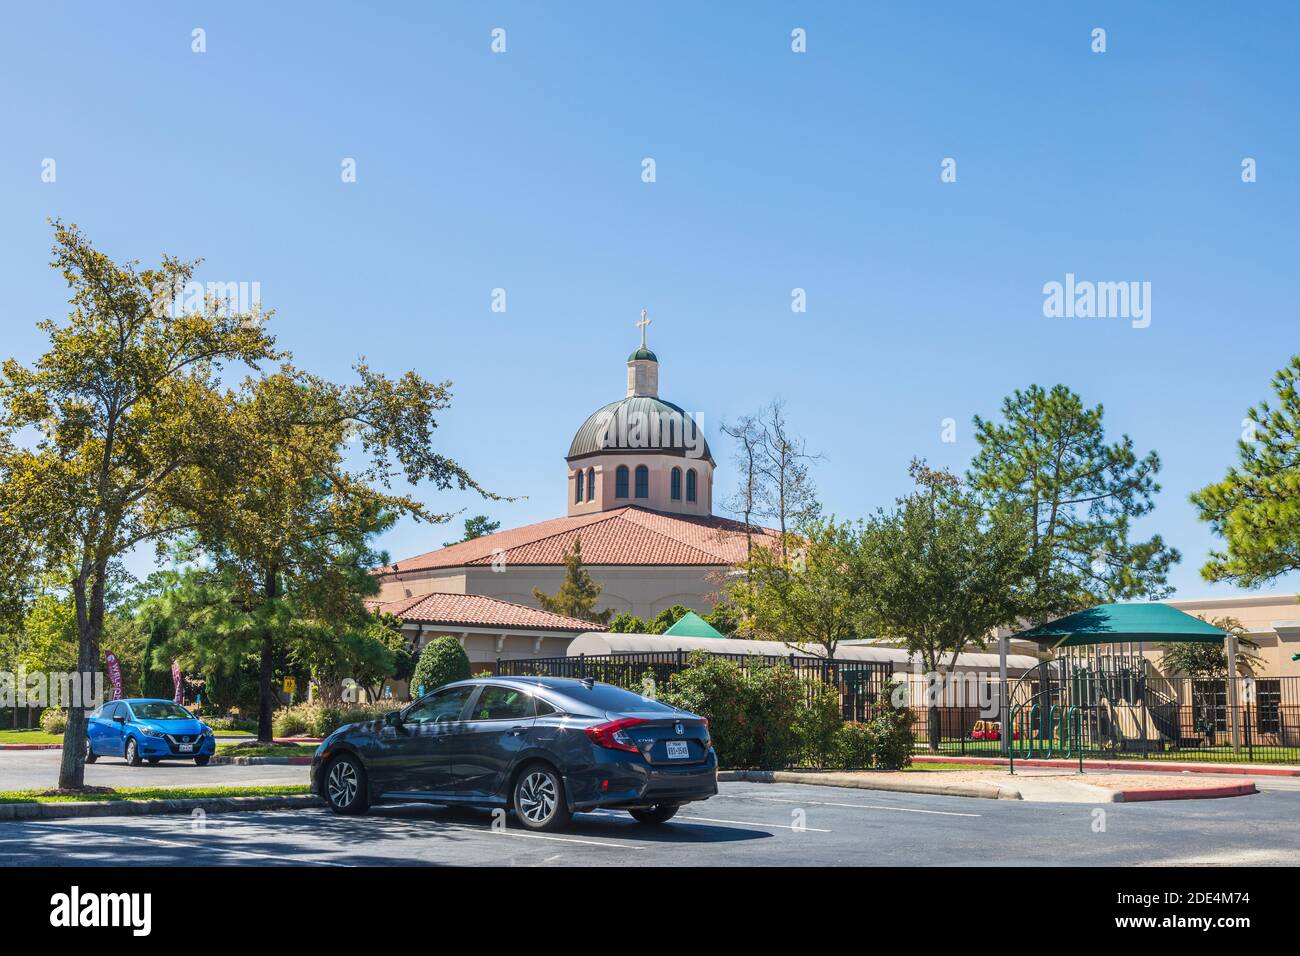 The Woodlands United Methodist Church beautiful campus in The Woodlands, Texas. Stock Photo